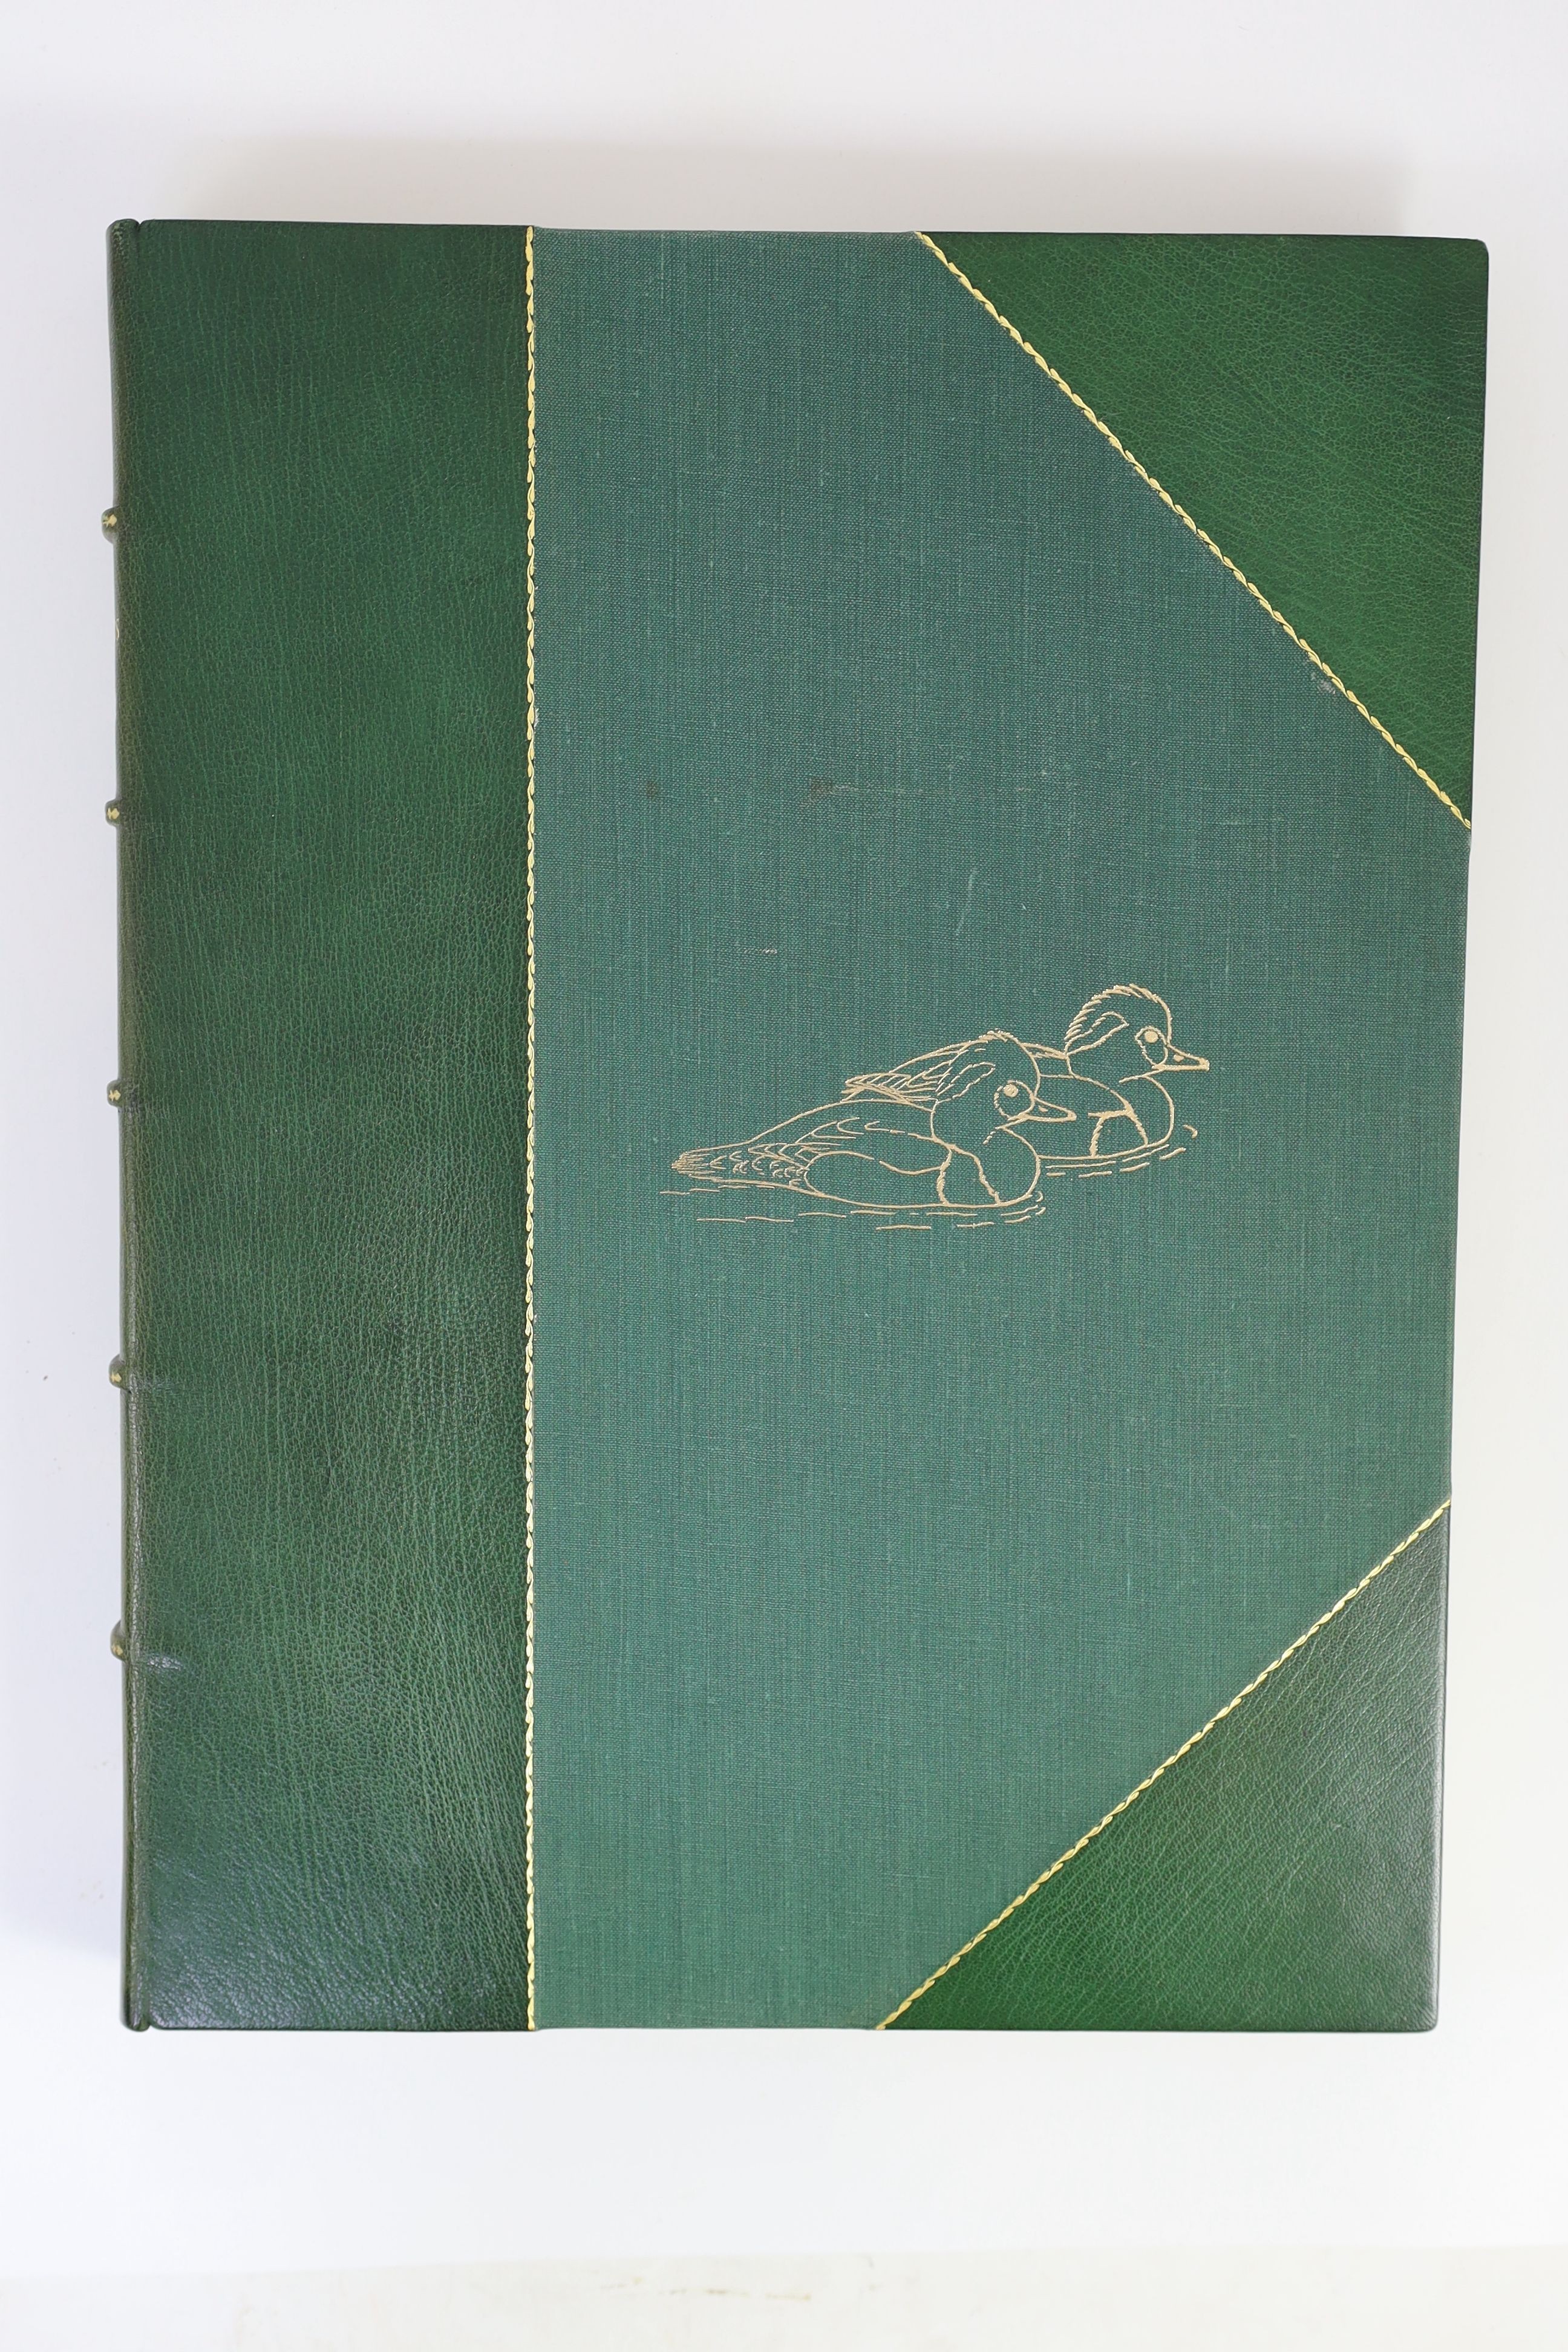 Rickman, Philip - A Selection of Bird Paintings and Sketches, one of 500 signed by the artist, folio, original half green morocco gilt, with mounted portrait and 31 mounted plates, Curpotten Ltd., London, 1979, in slip c